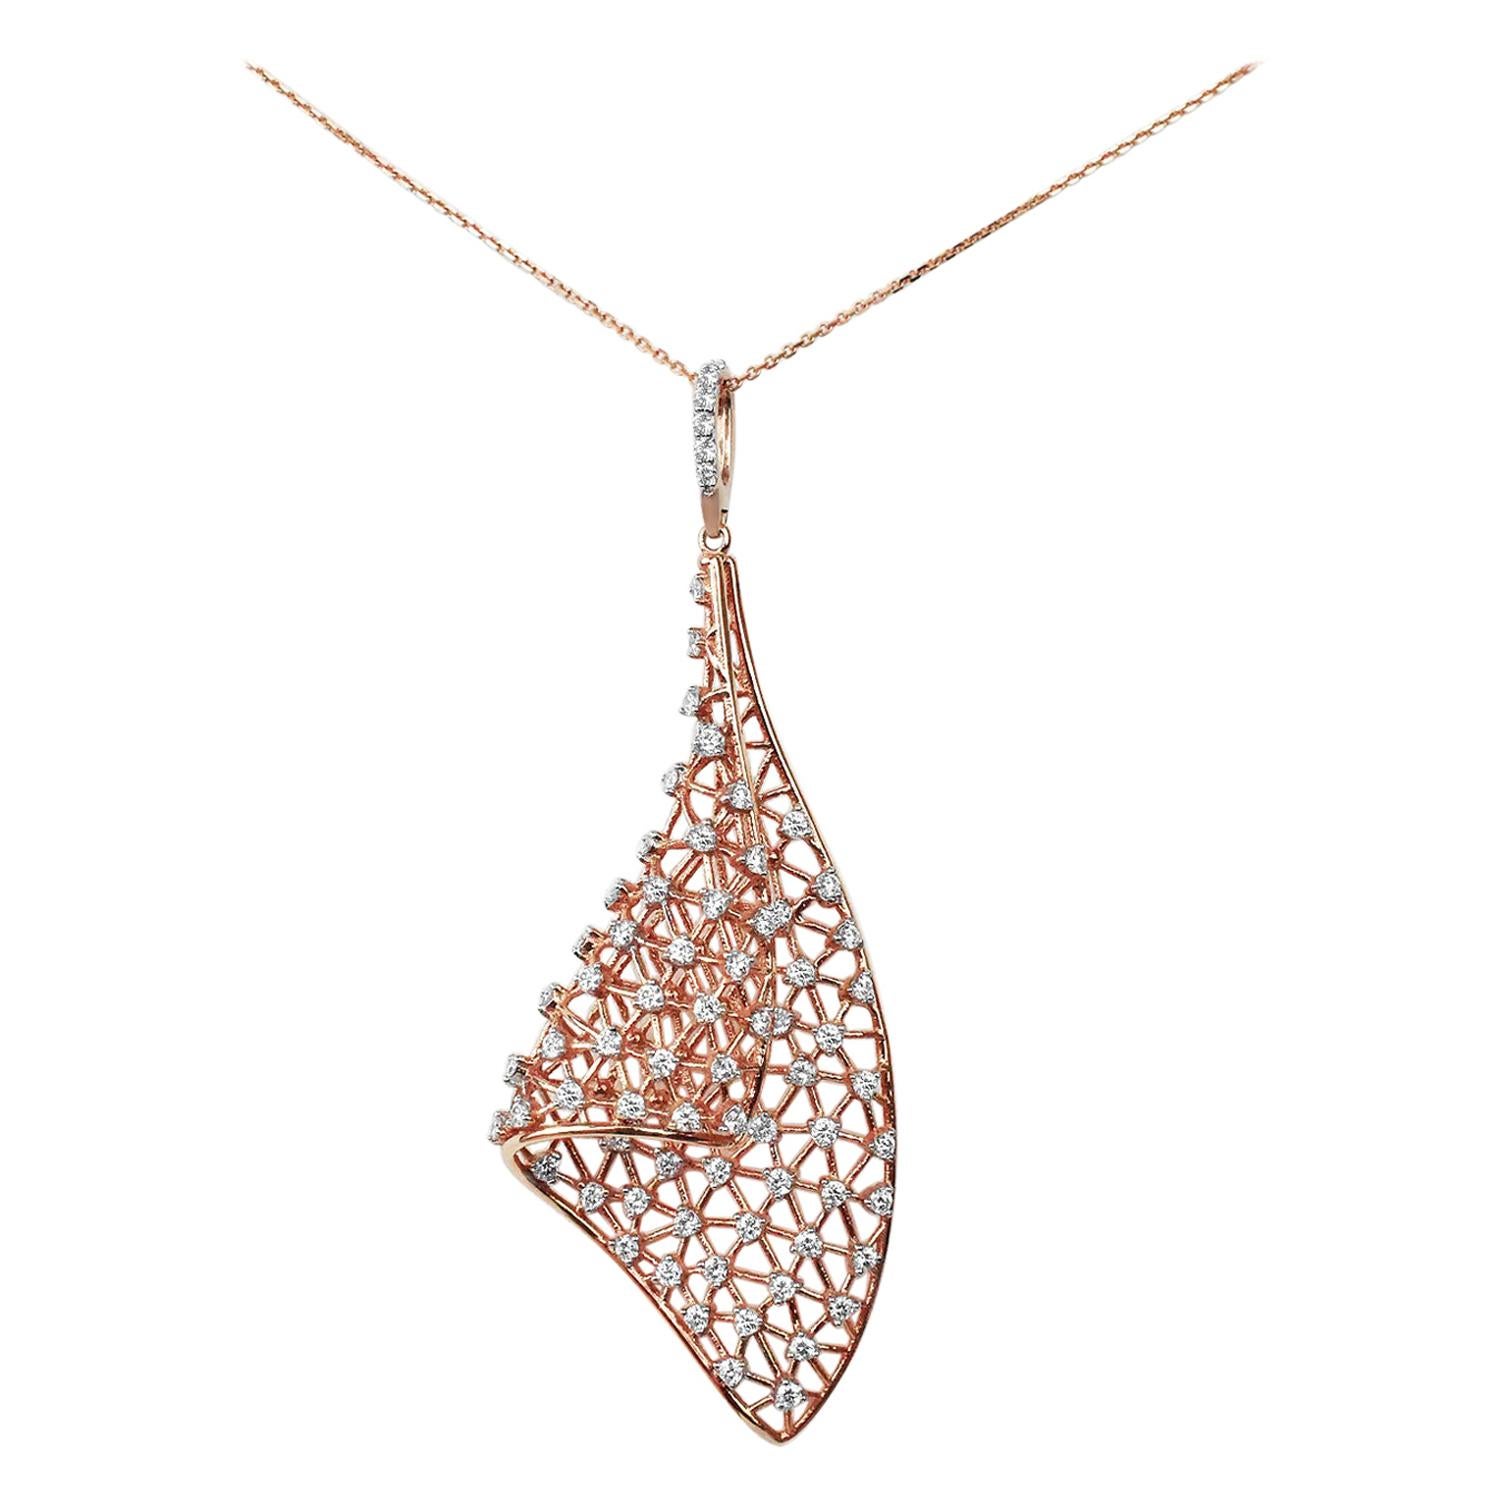 18Karat Gold Pendant Necklace Rose Gold Diamond Pave Fashion Pendant Necklace
           An art nouveau master piece in 18K rose gold, perfectly reimagining in rose gold, the delicately crafted hand-woven flowing diamonds pendant necklace.
        